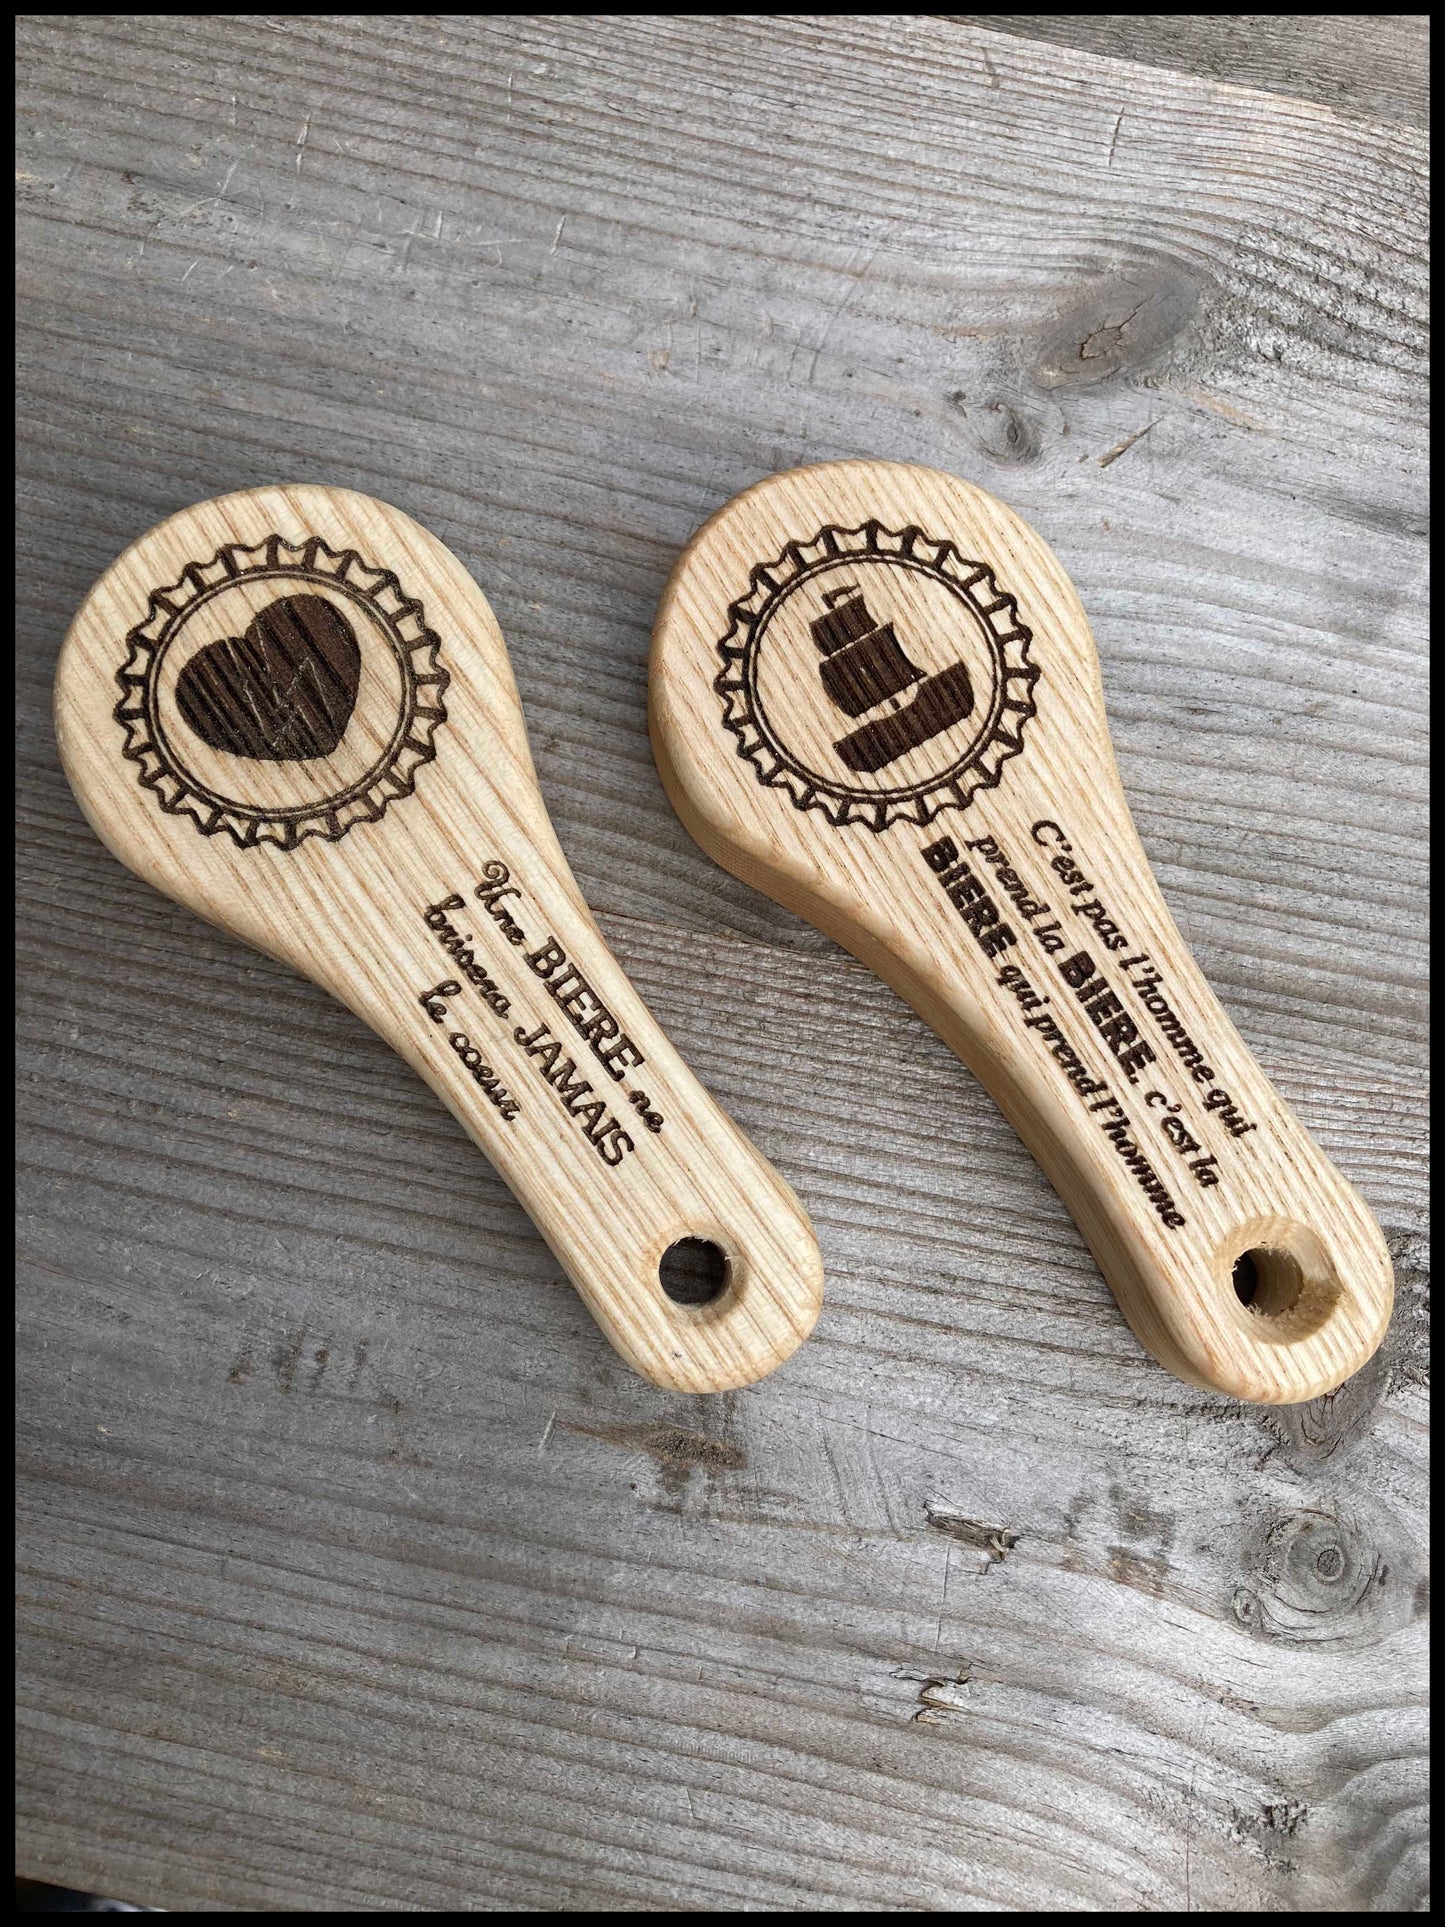 Customizable manual bottle opener in solid ash wood